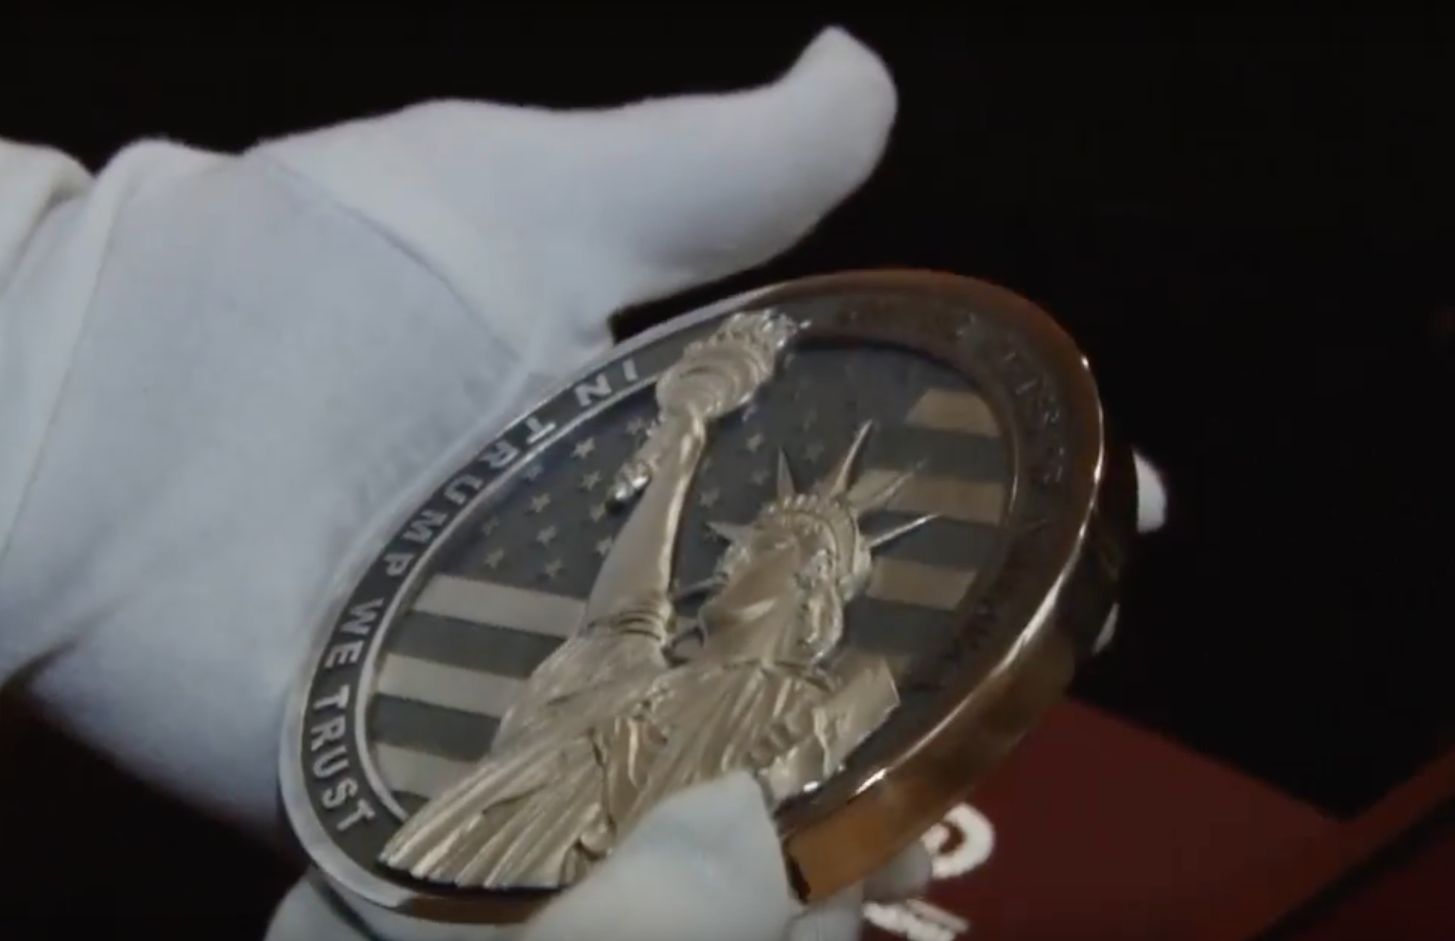 The coin's opposite side features the Statue of Liberty and the engraved line: "In Trump We Trust."